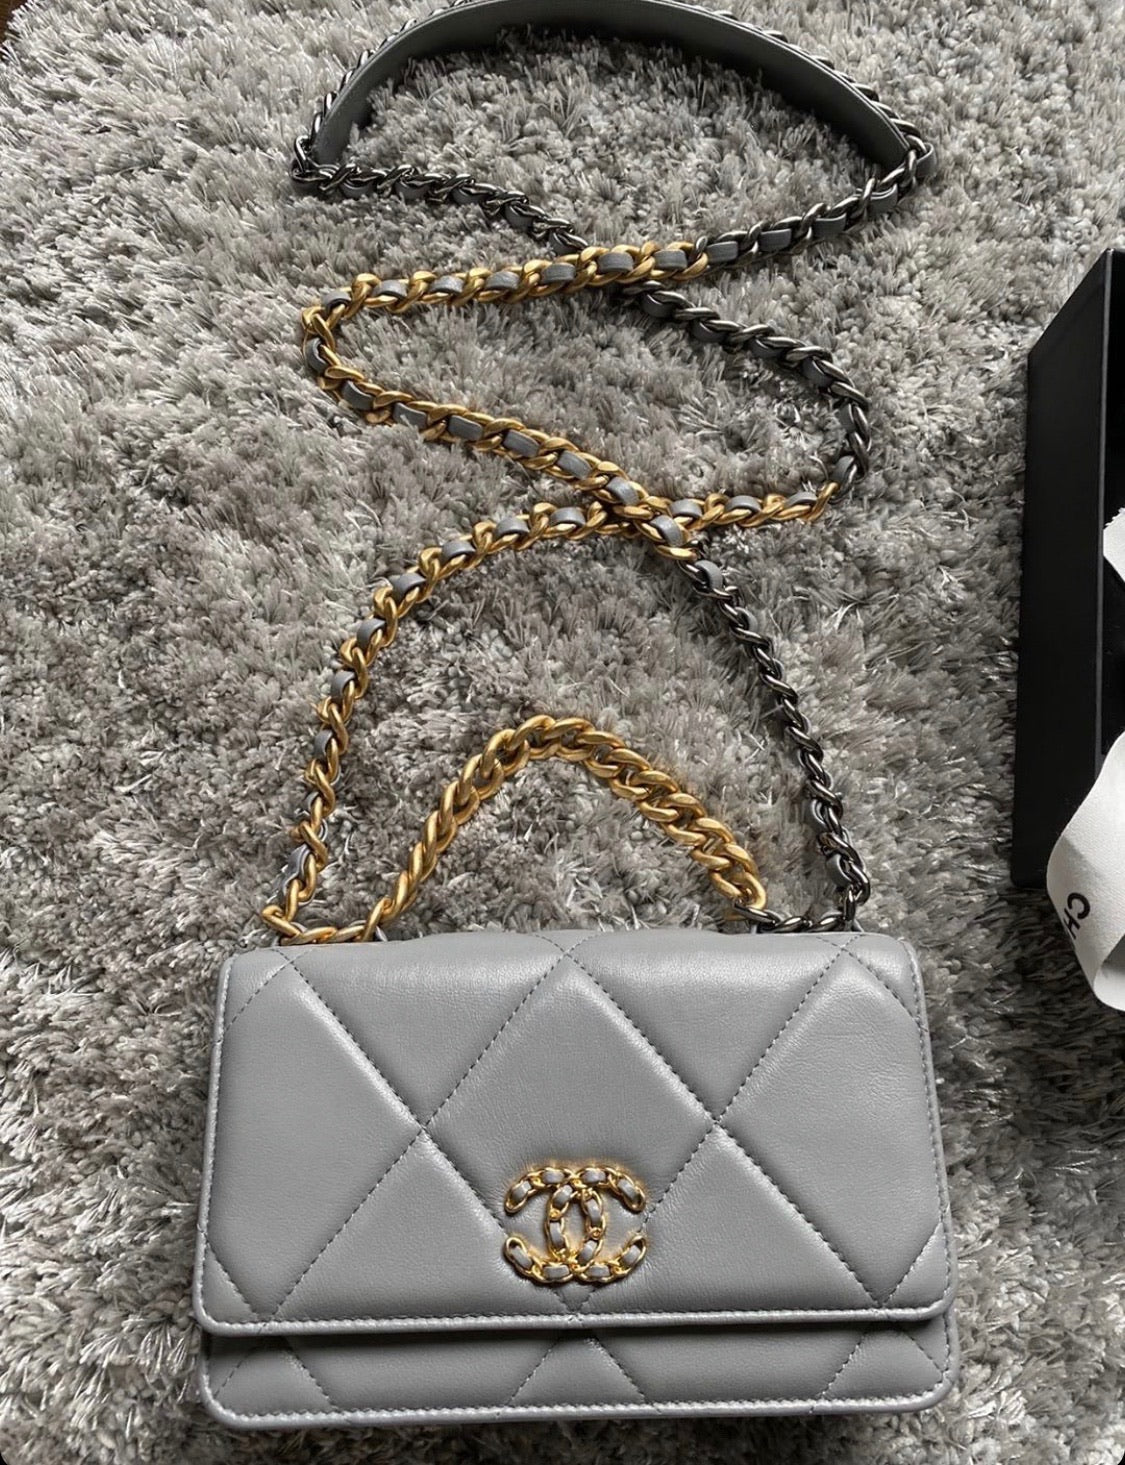 Chanel 19 woc  Beccas Bags